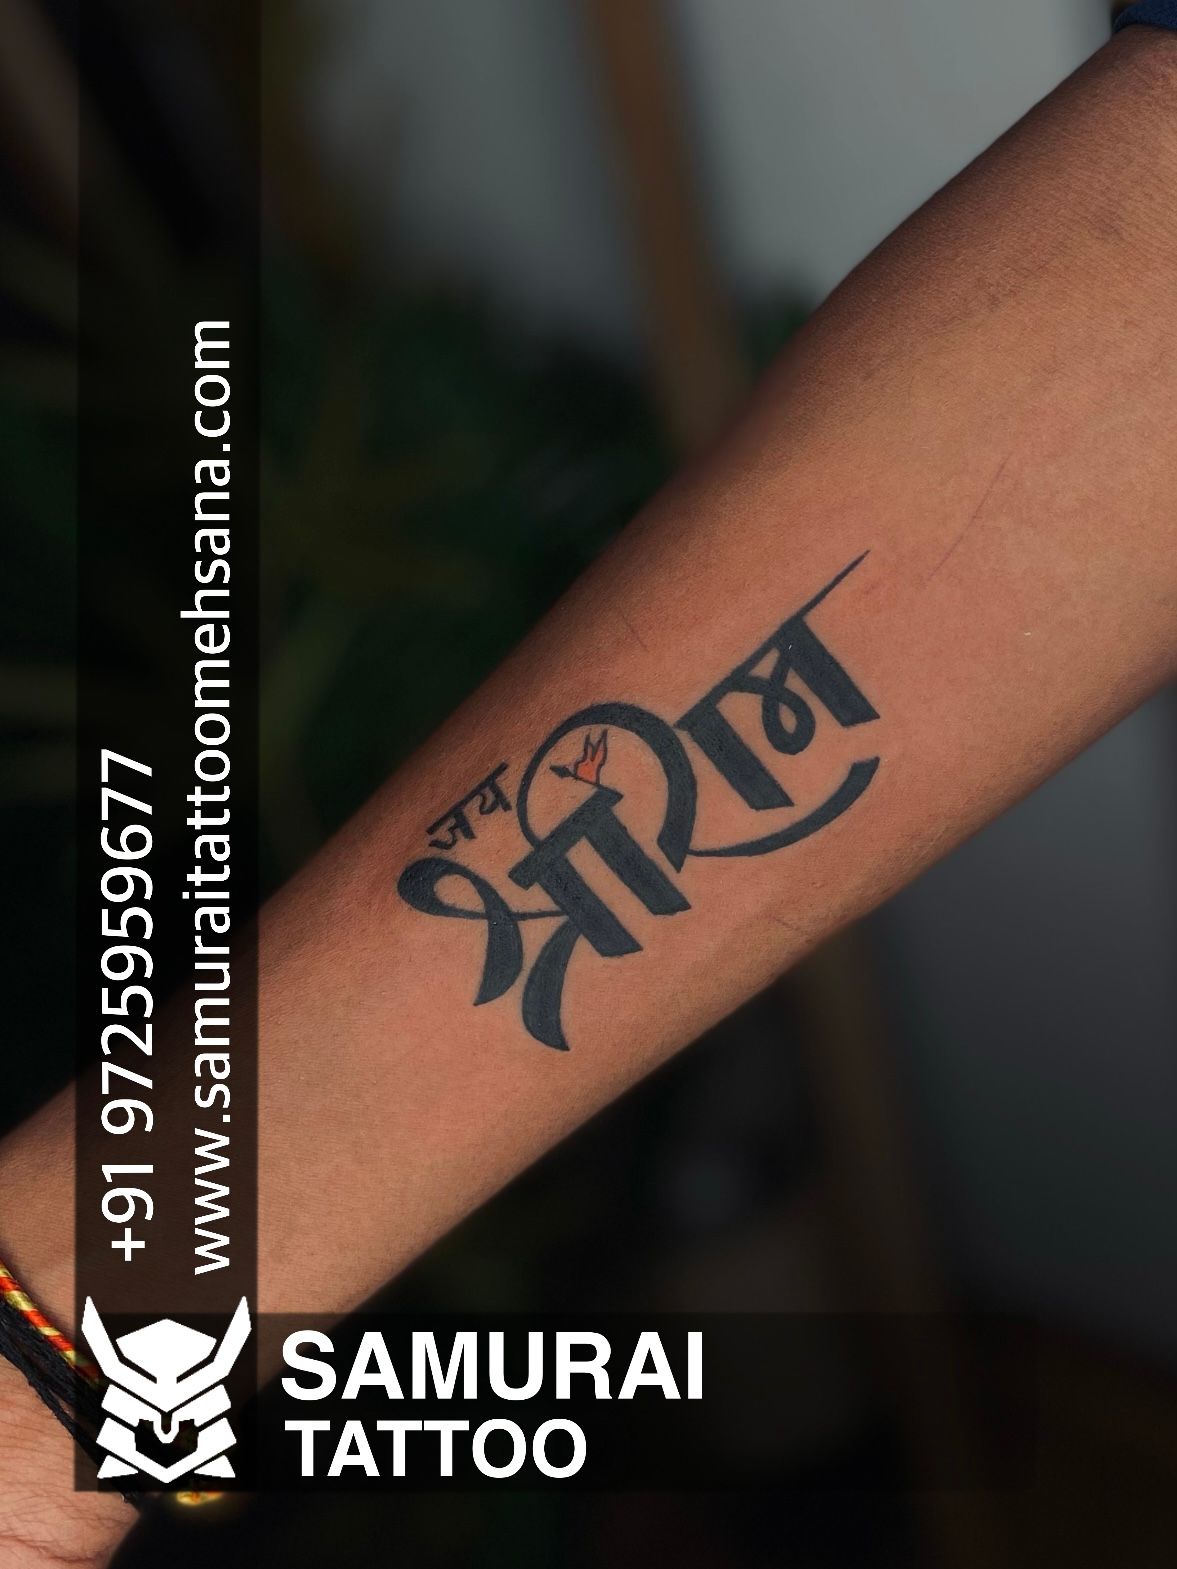 Buy Voorkoms Lord Hanuman Tattoo with Jai Shree Ram Temporary Body Tattoo  For Male and Female Online at Best Prices in India - JioMart.